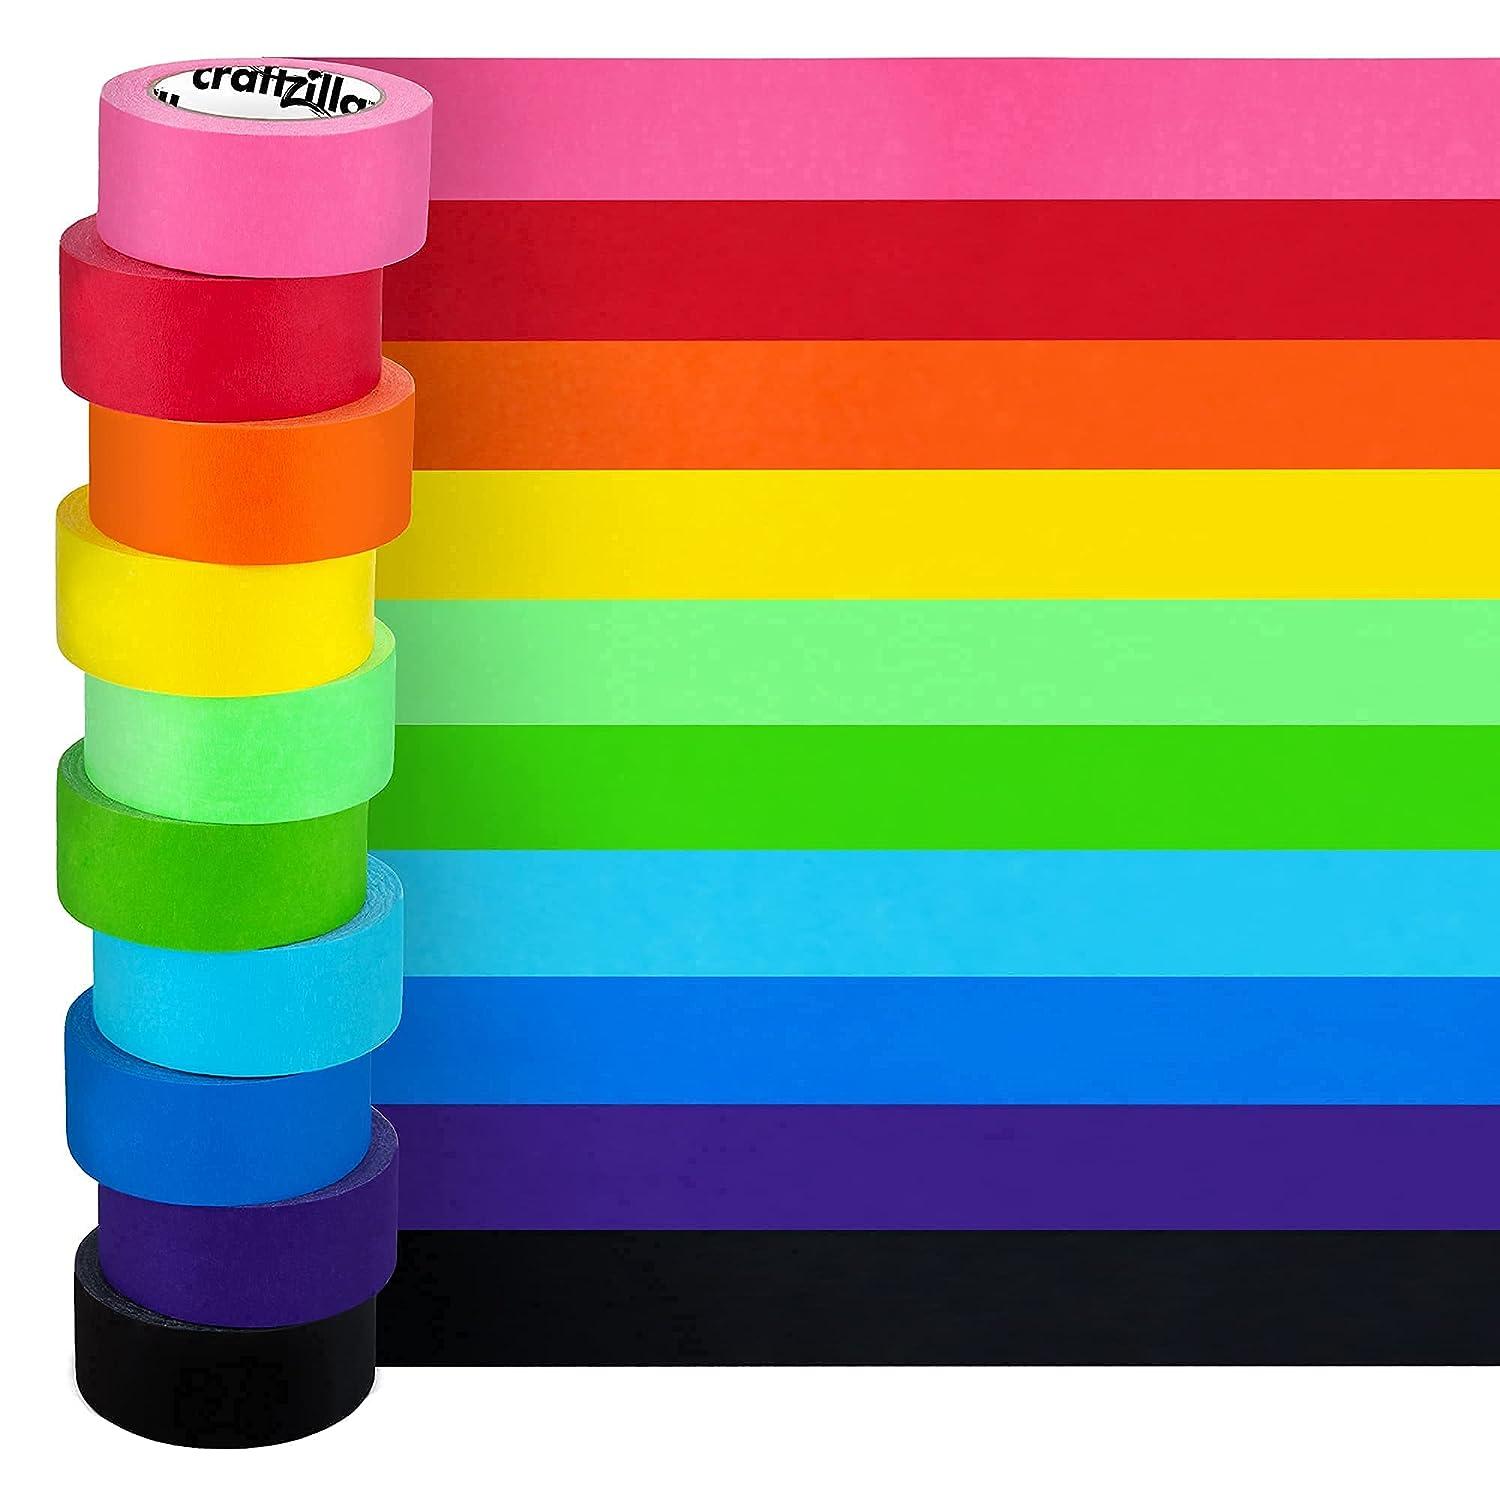 Craftzilla Colored Duct Tape Variety Pack - 6 Bright Rainbow Duct